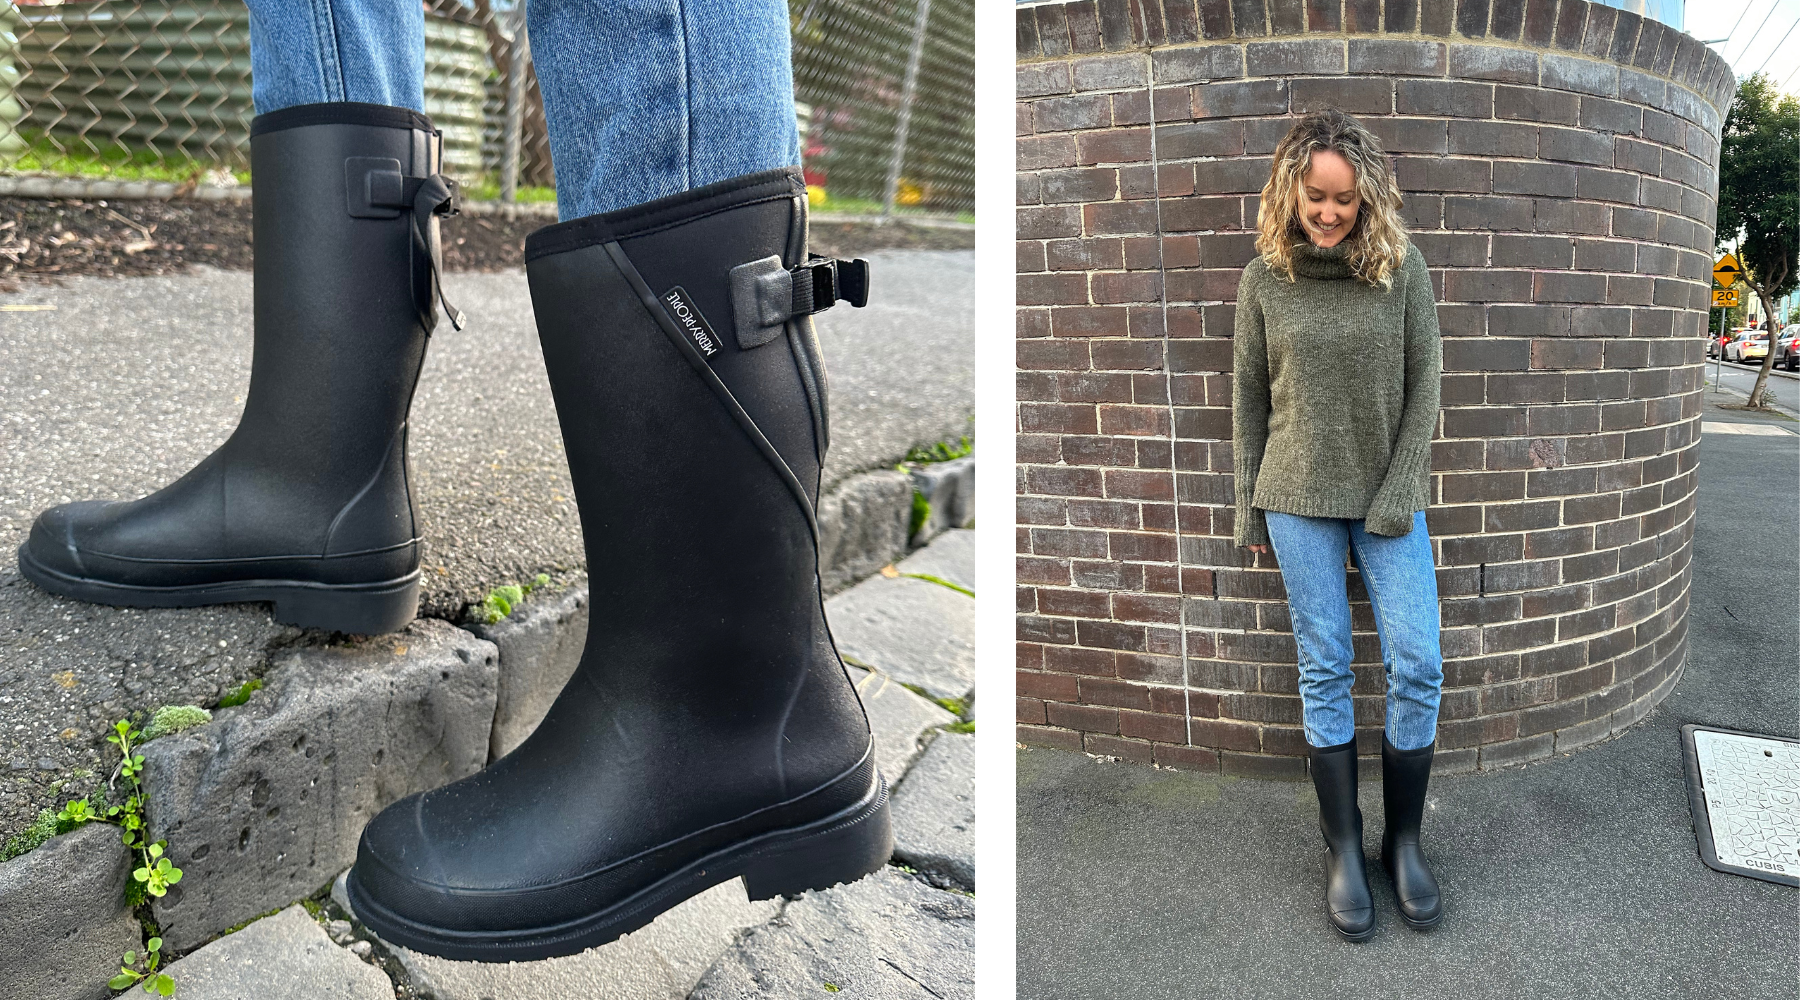 How to Wear Mid-Calf Boots With Jeans